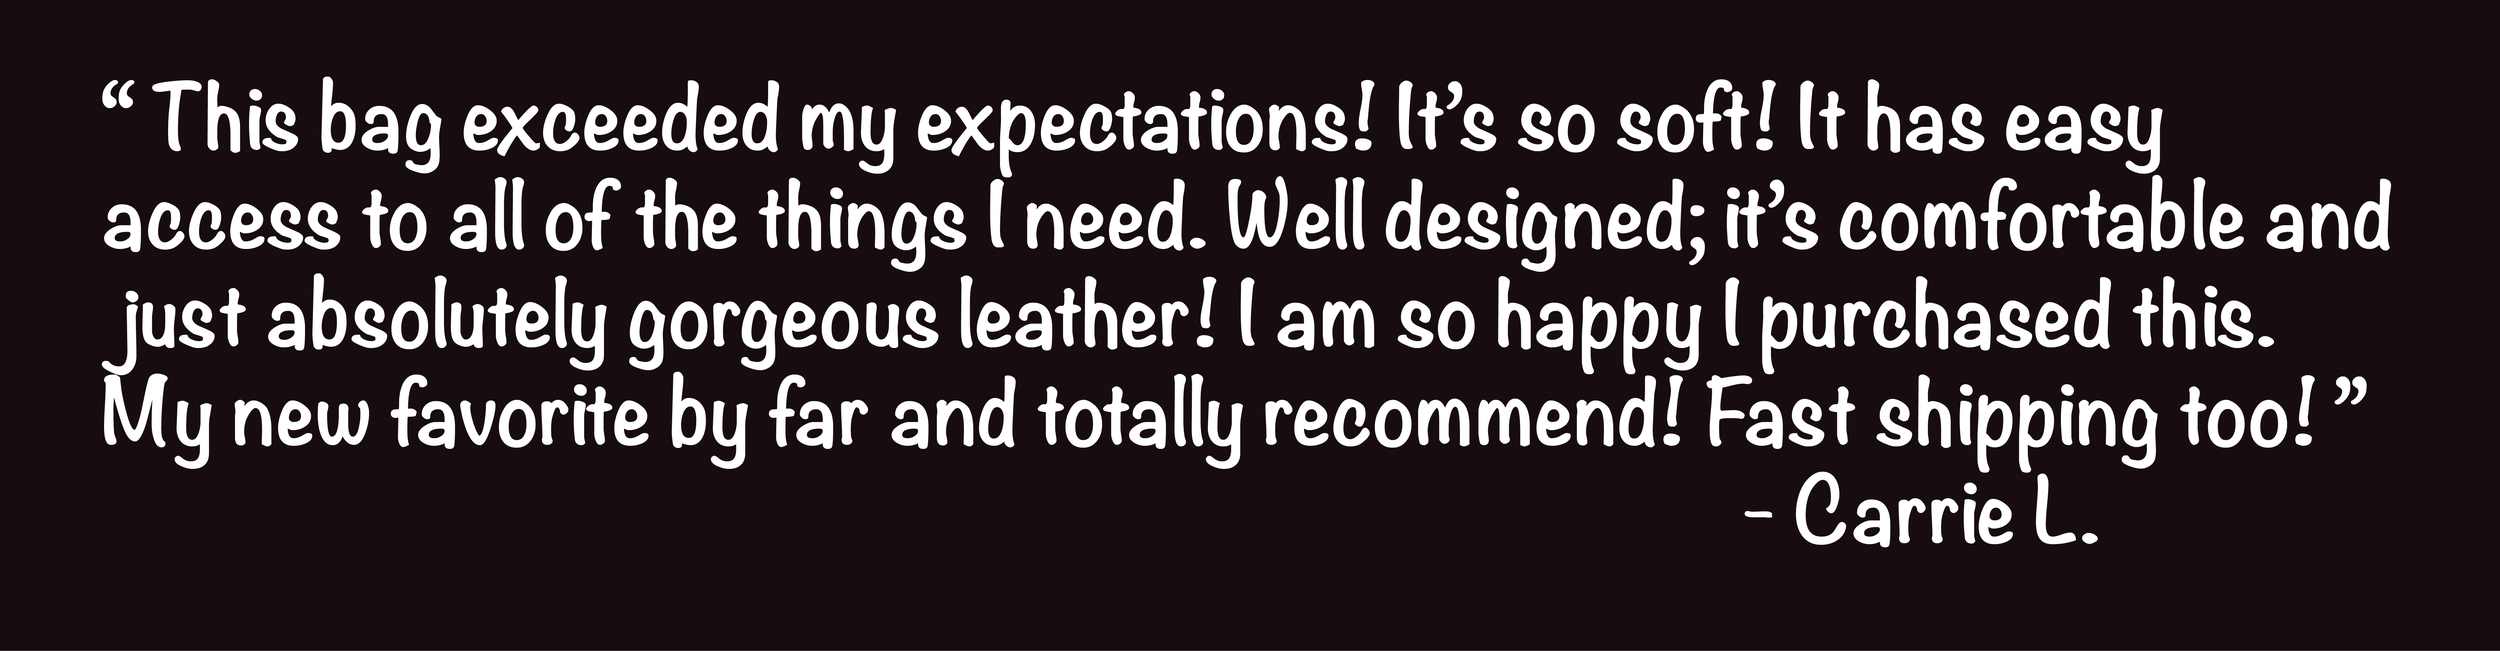 Testimonial Banners-07.png